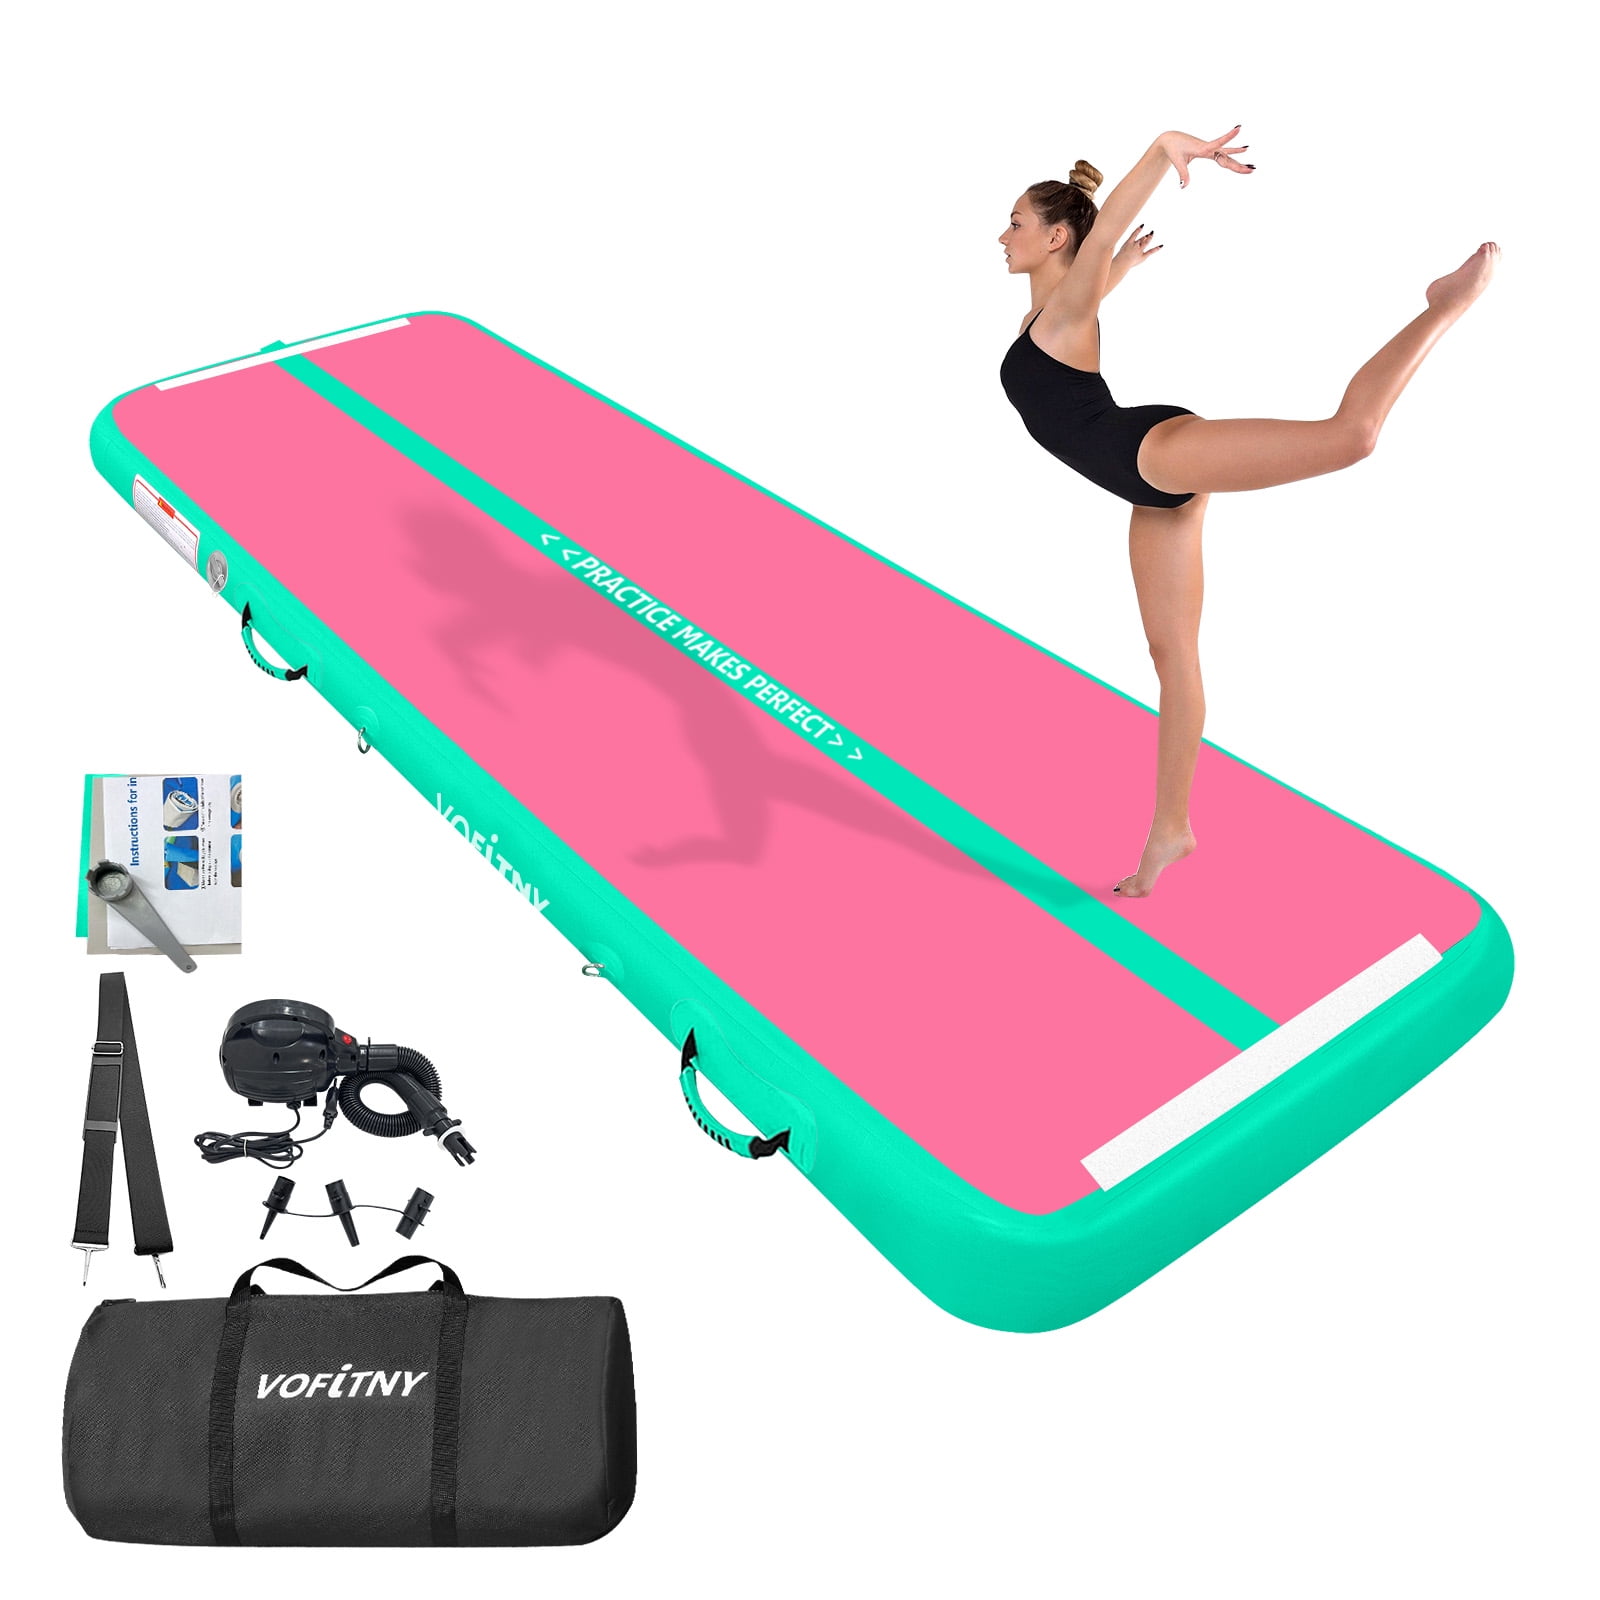 20 ft VOFiTNY Inflatable Gym Mats 4'' Thick Air Mat Track for home/gymnastics/cheer/tumbling -